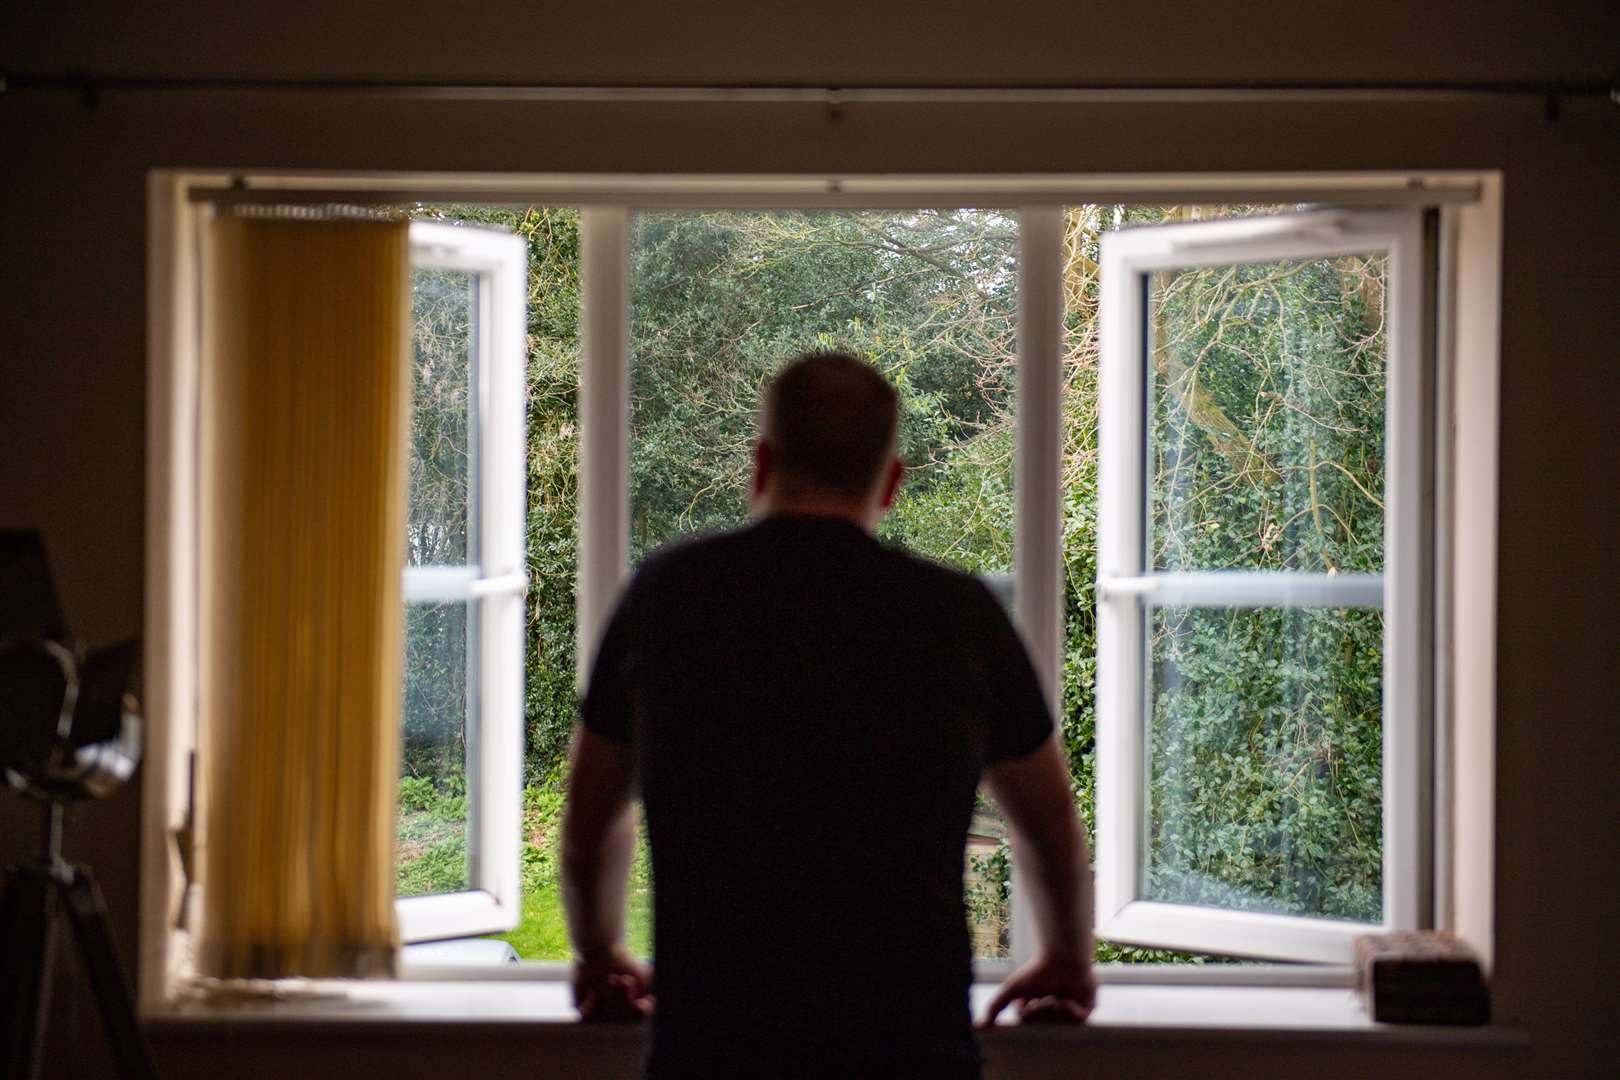 Self-isolation should start from the day that symptoms appear (Jacob King/PA Wire)